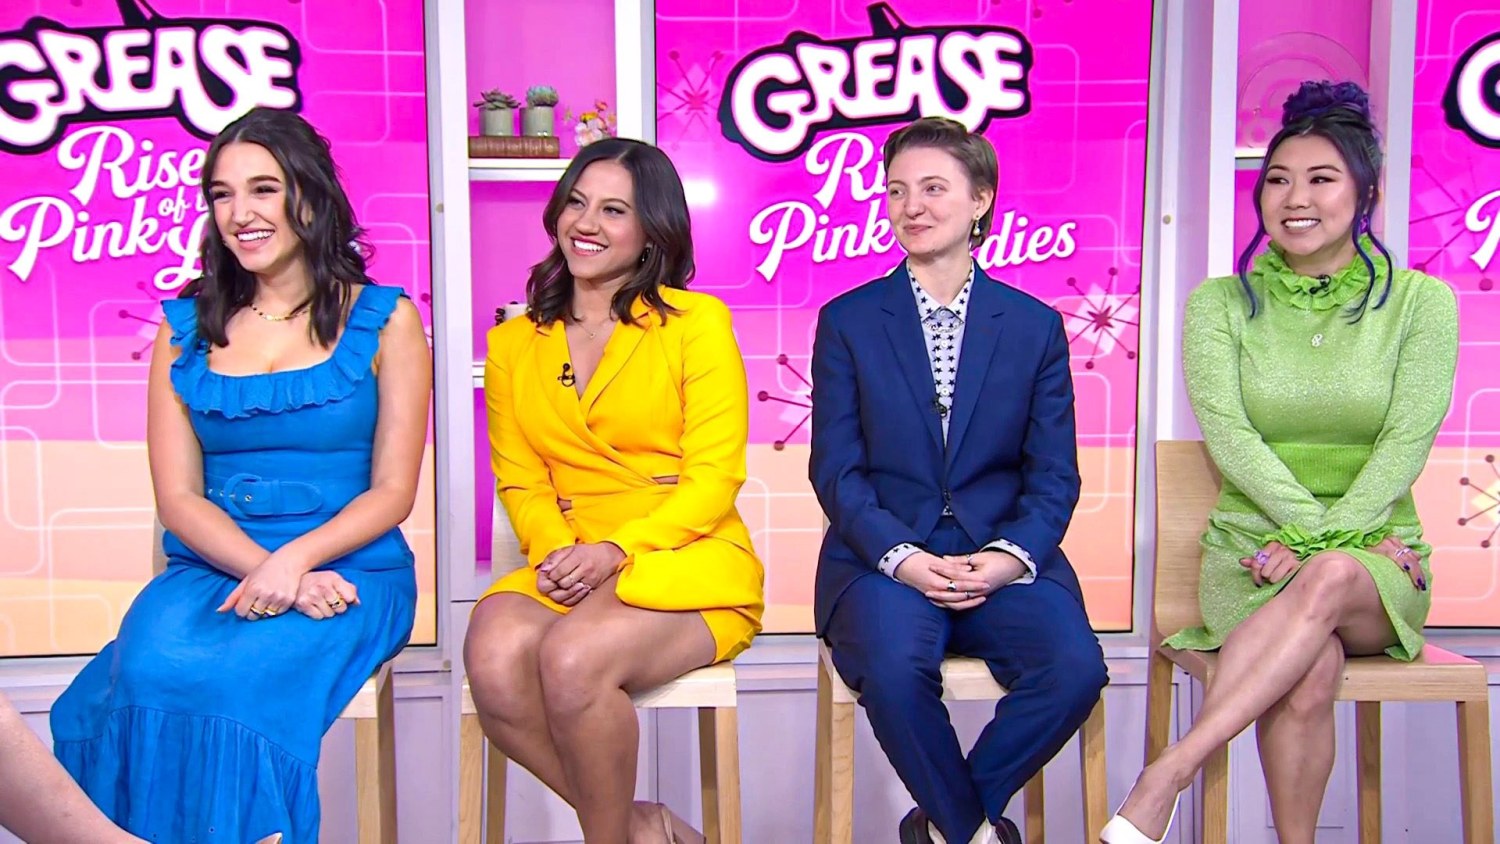 Rise of the Pink Ladies' Cast Share Their First Memories of 'Grease